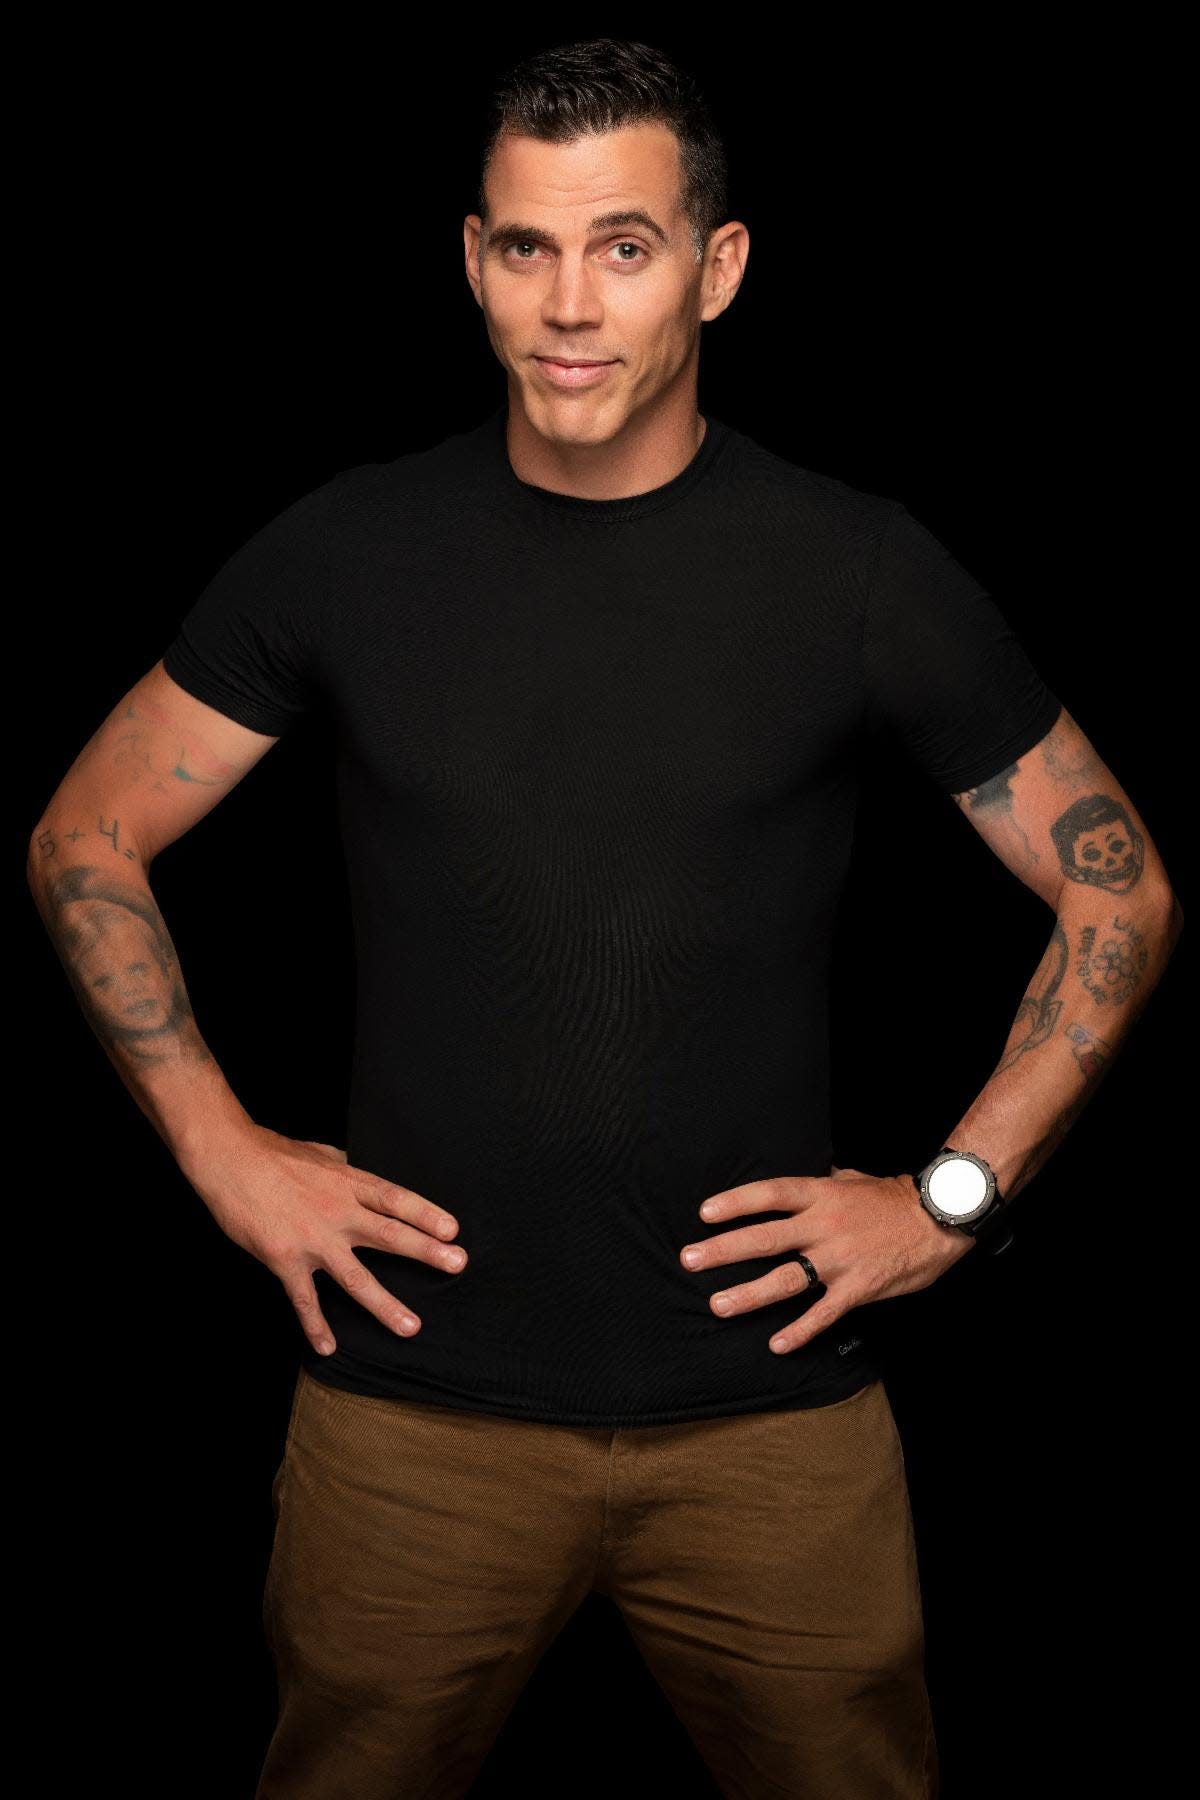 Steve-O coming to Sioux Falls.